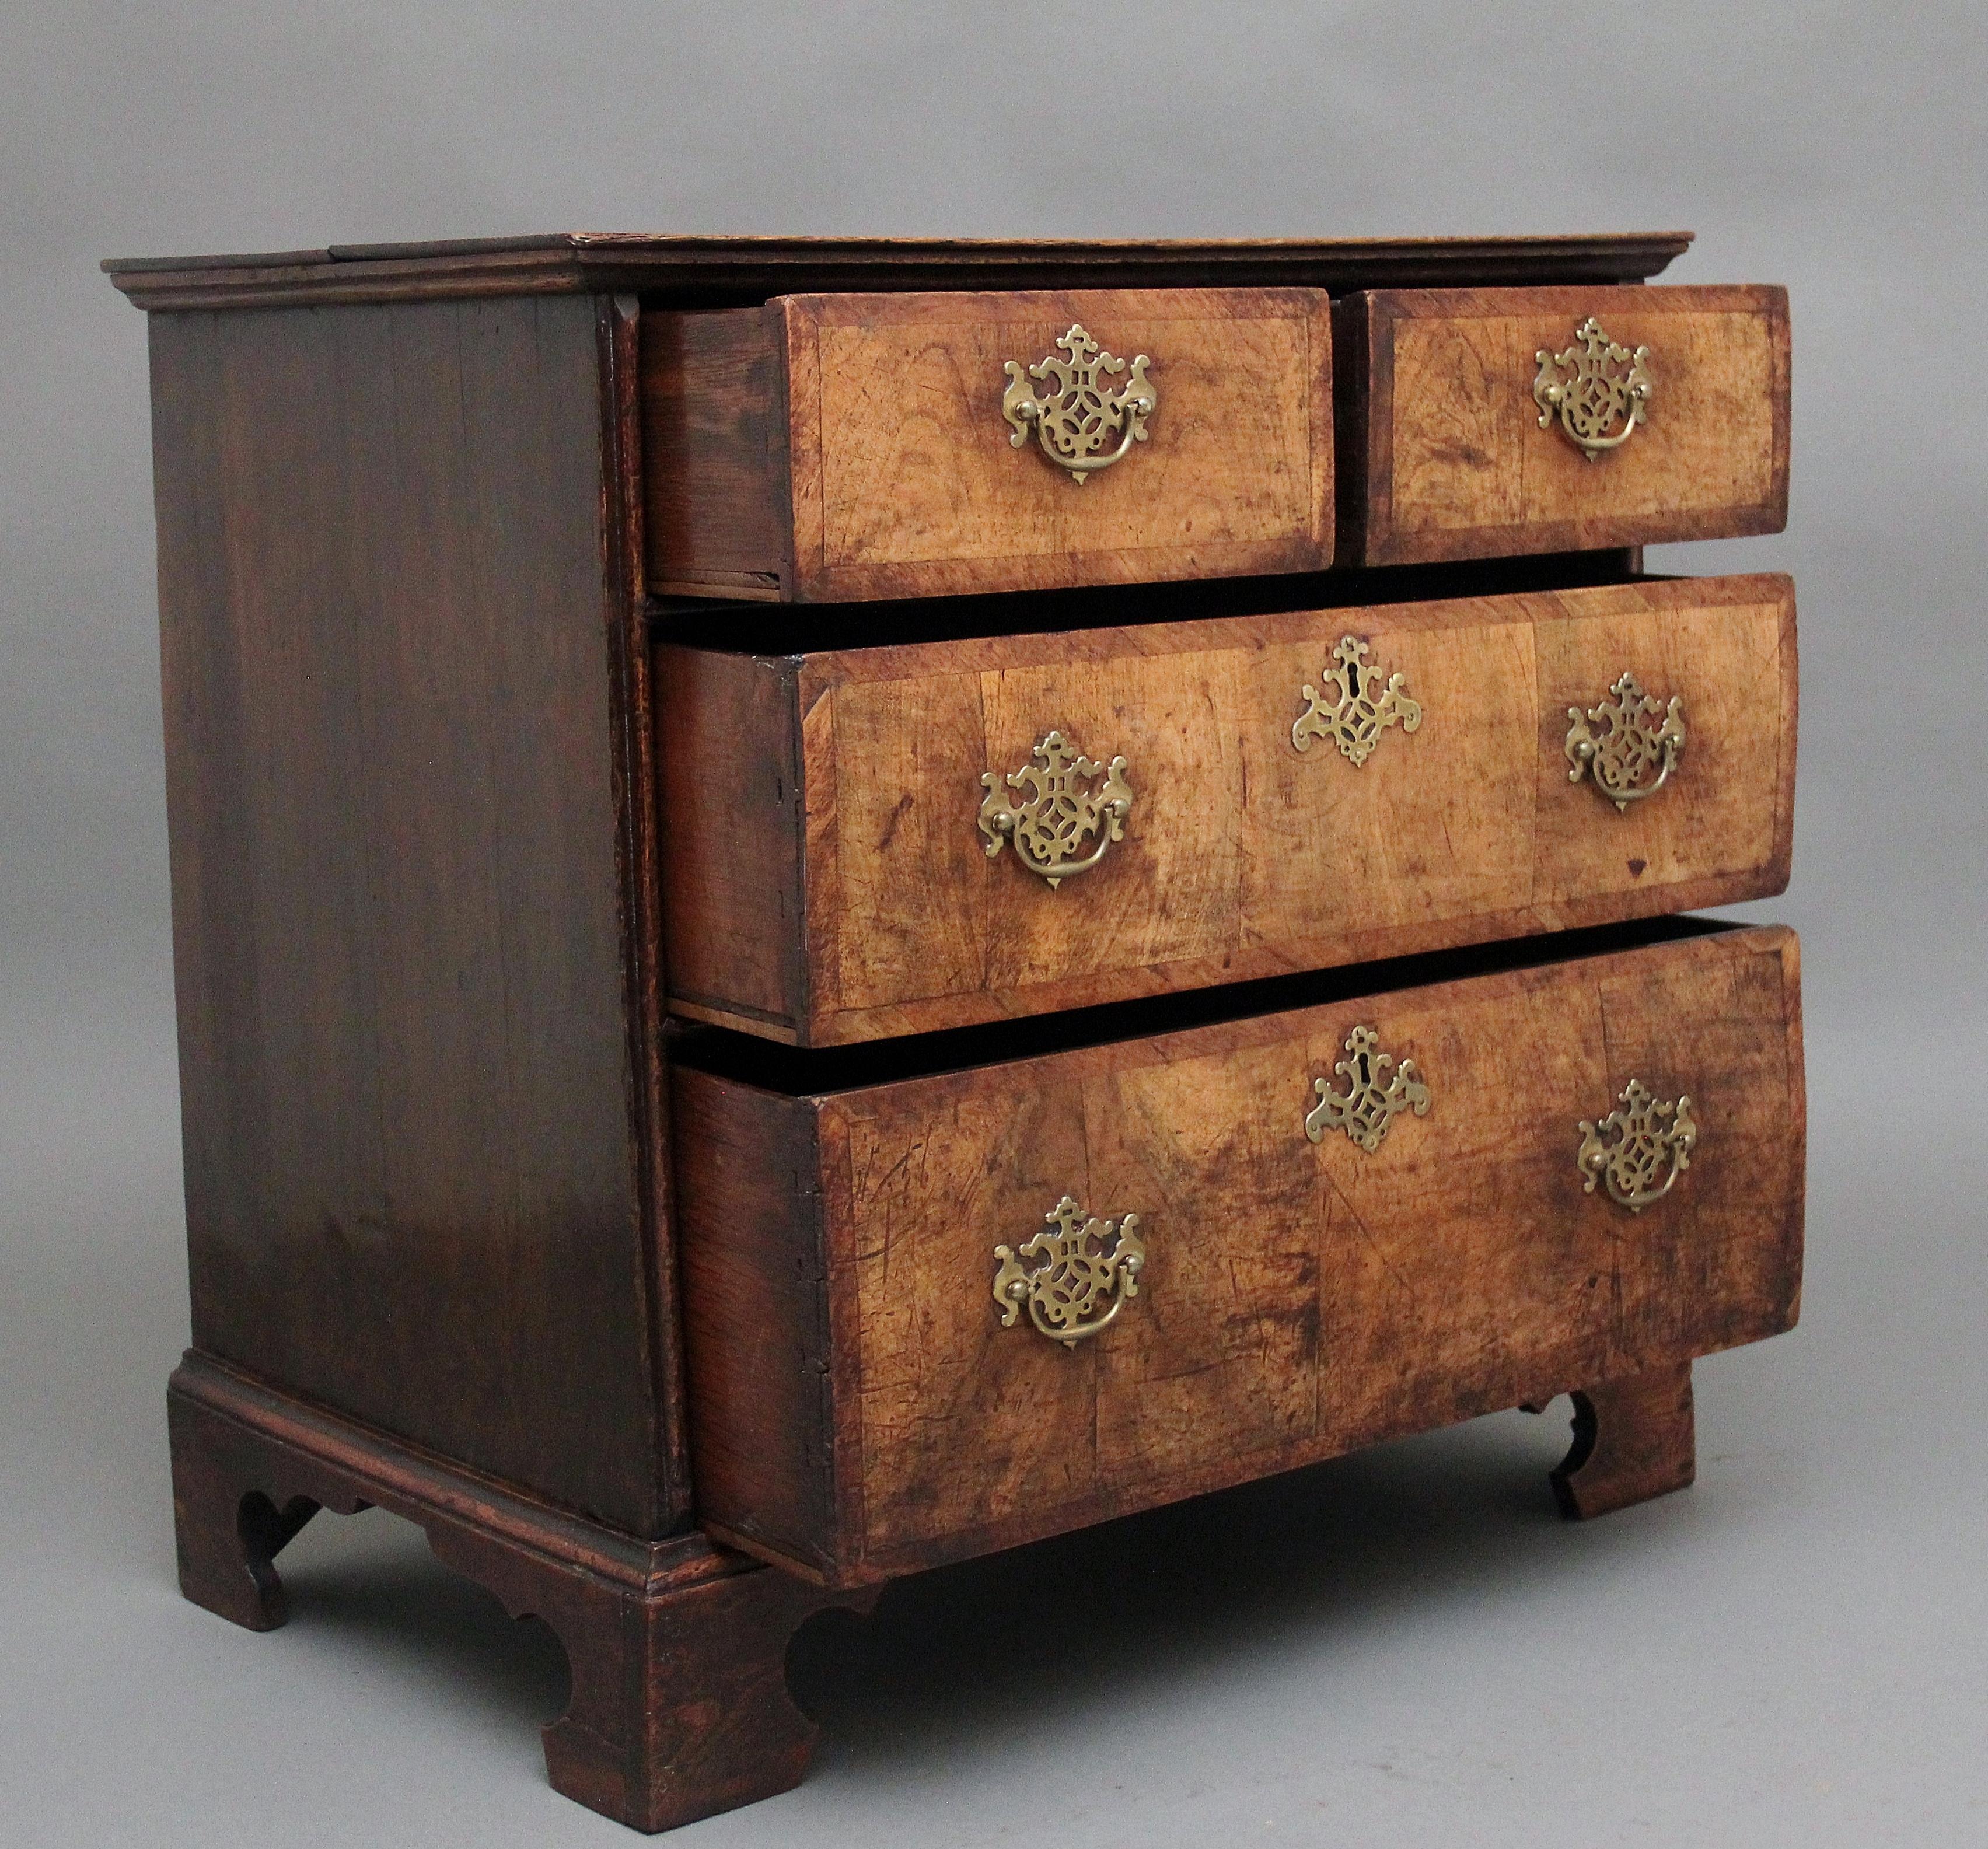 British Early 18th Century walnut chest For Sale